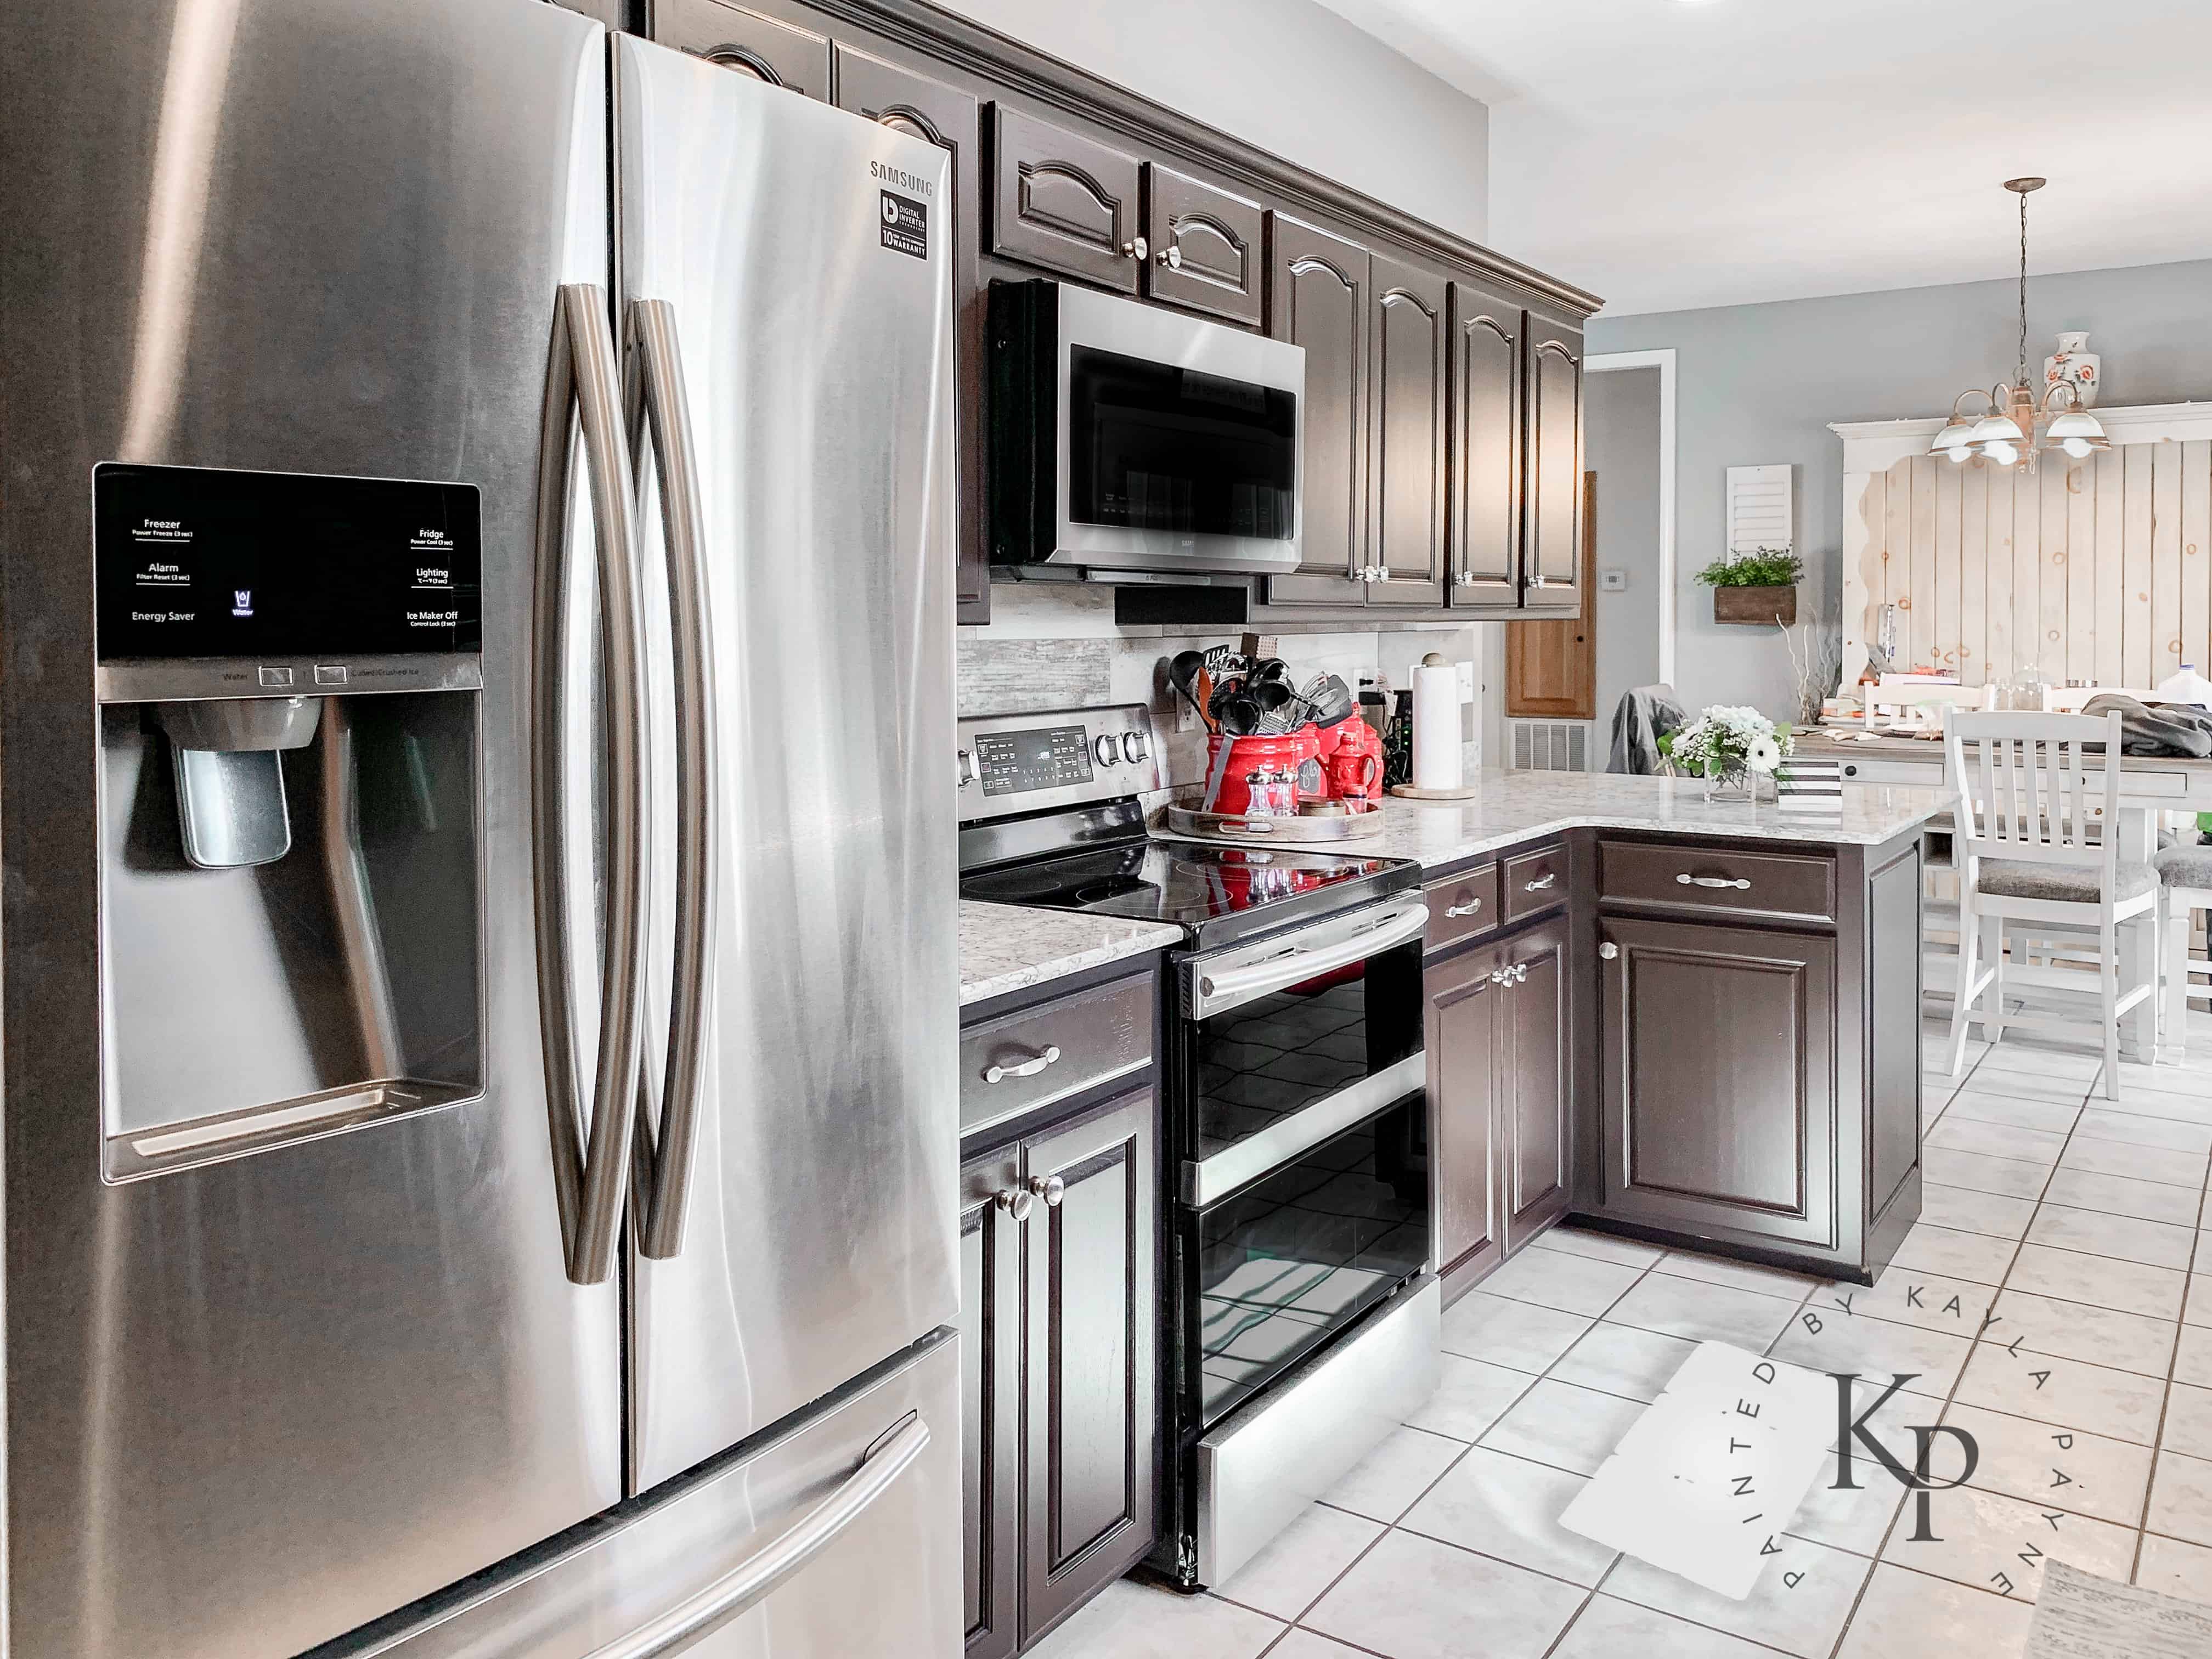 Dark kitchen cabinets and light granite counters. It's true, not everyone wants white cabinets!